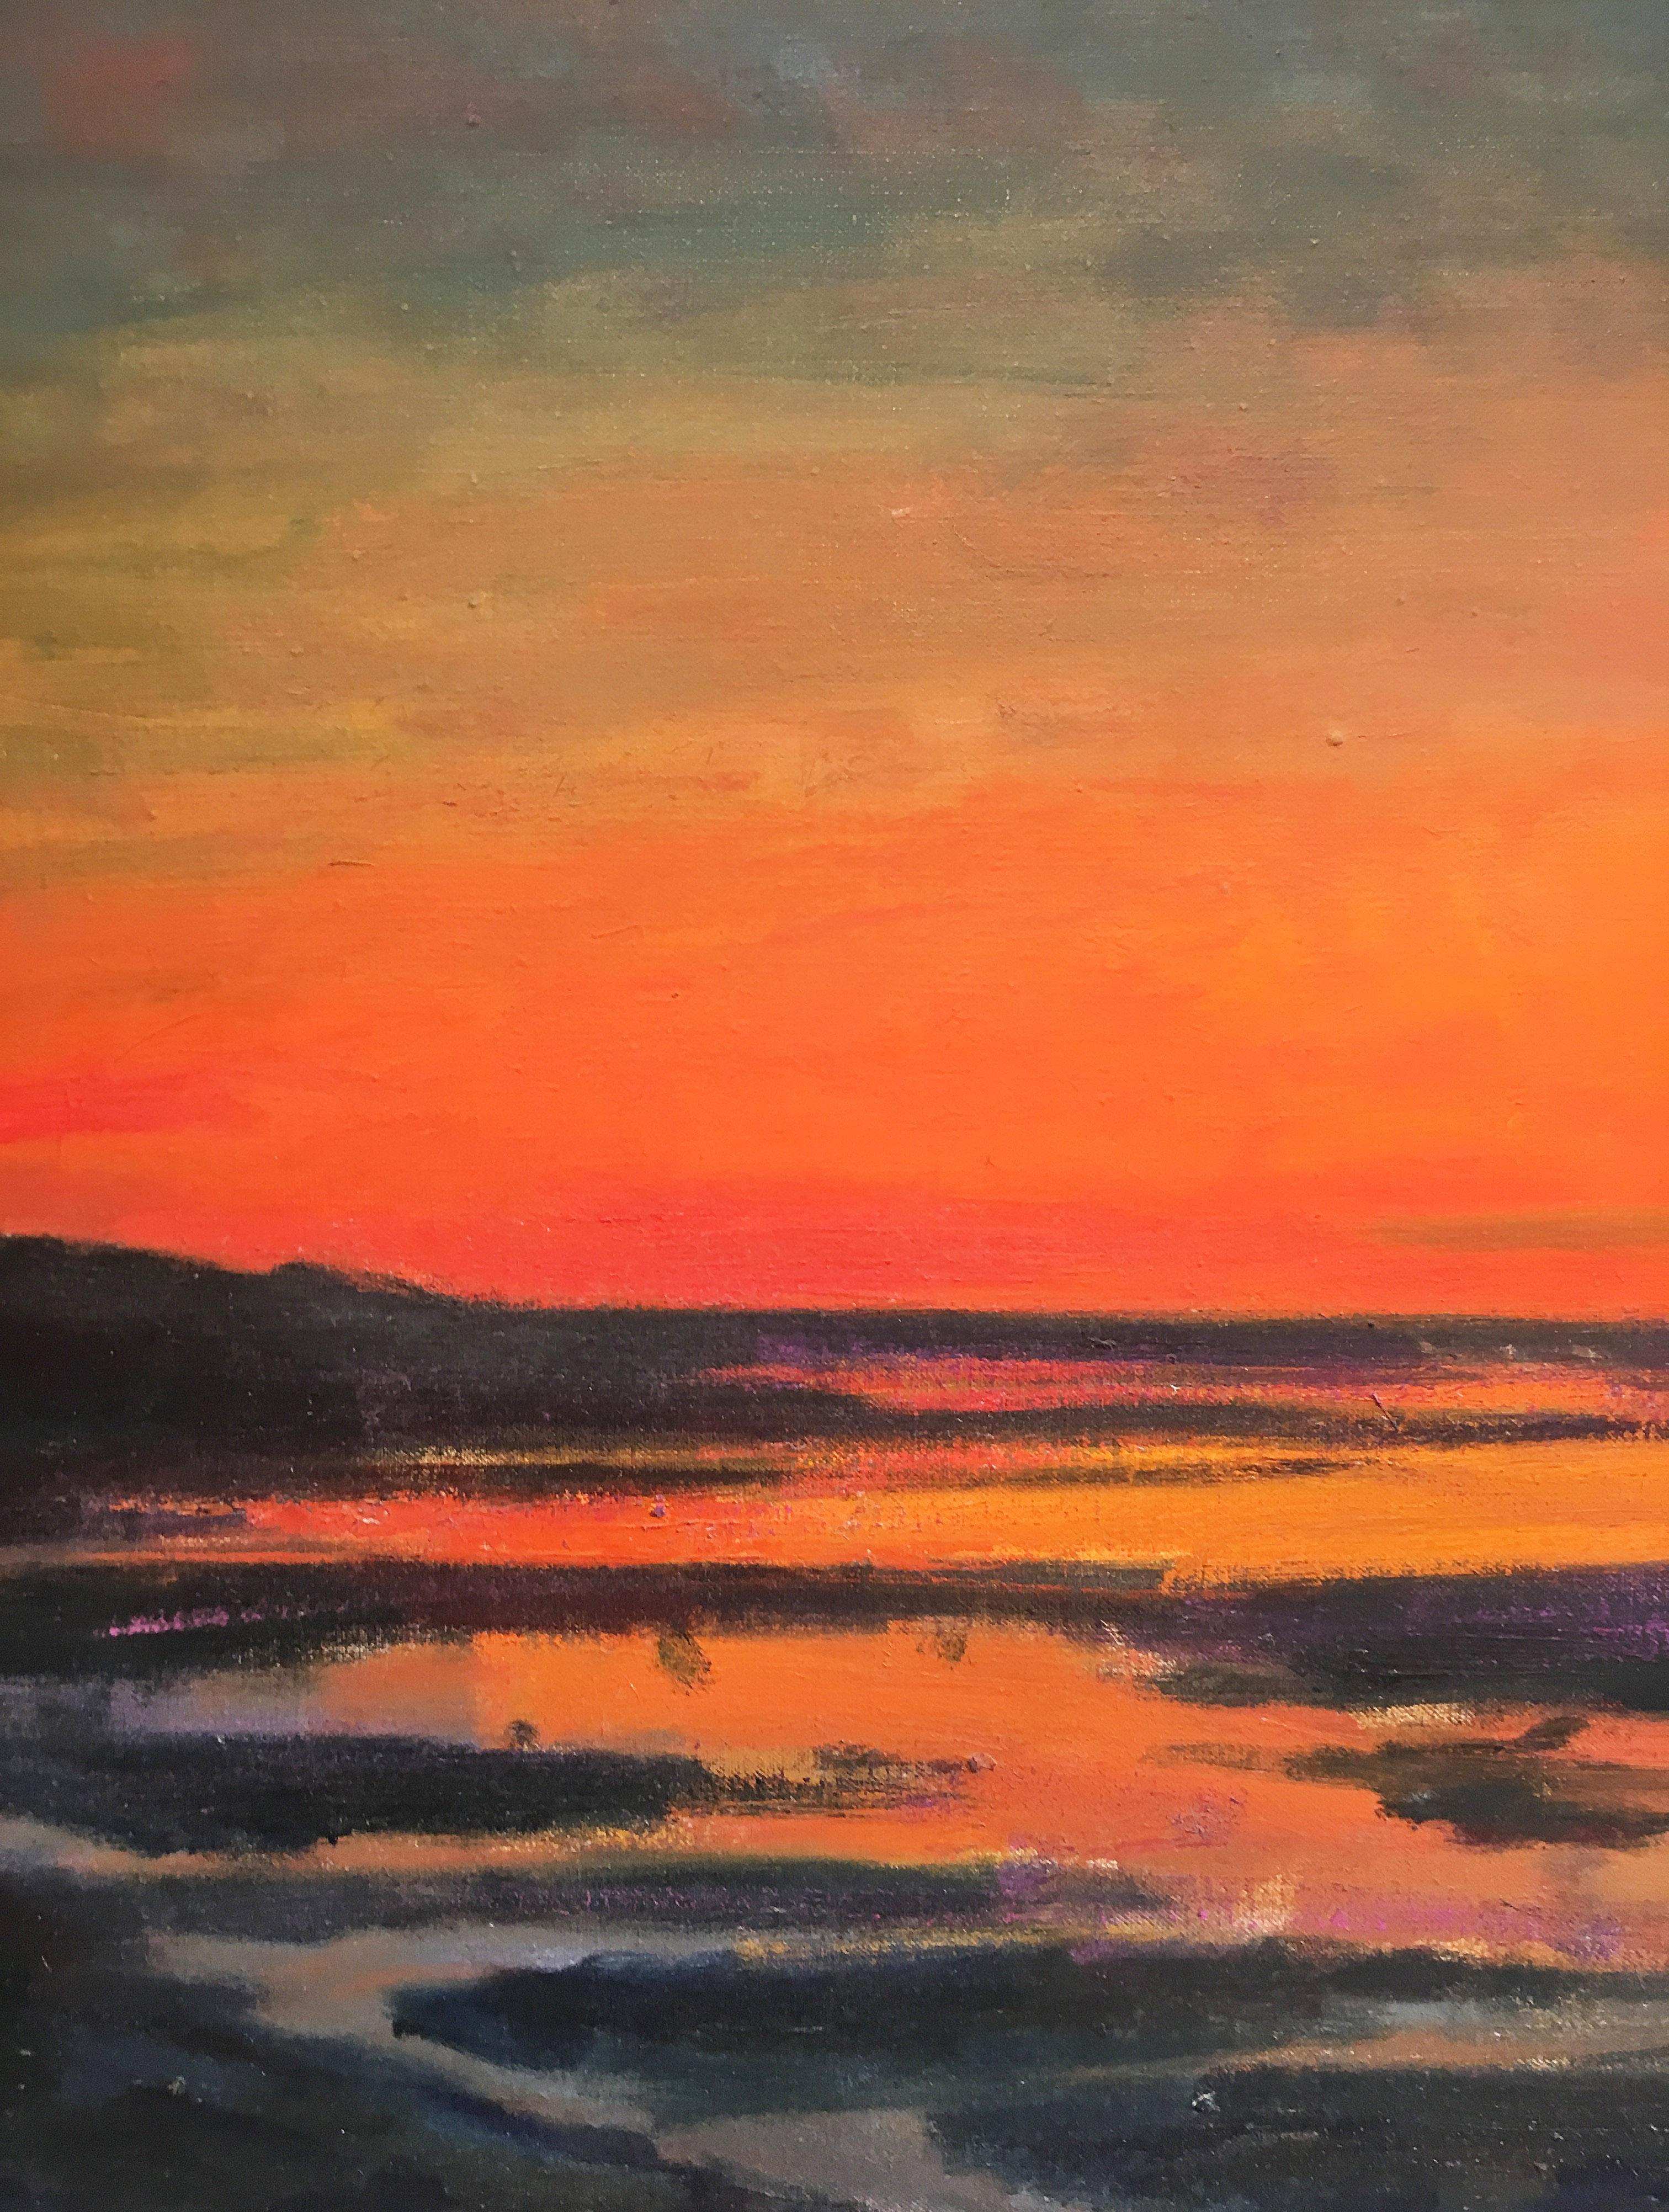 'Sunset Marsh' 1995 by Contemporary American impressionist landscape artist, Larry Horowitz. Oil on canvas, 36 x 52 in. This painting features an Impressionist landscape of sky and shore in rich colors of orange, blue, grey, and black.

Larry